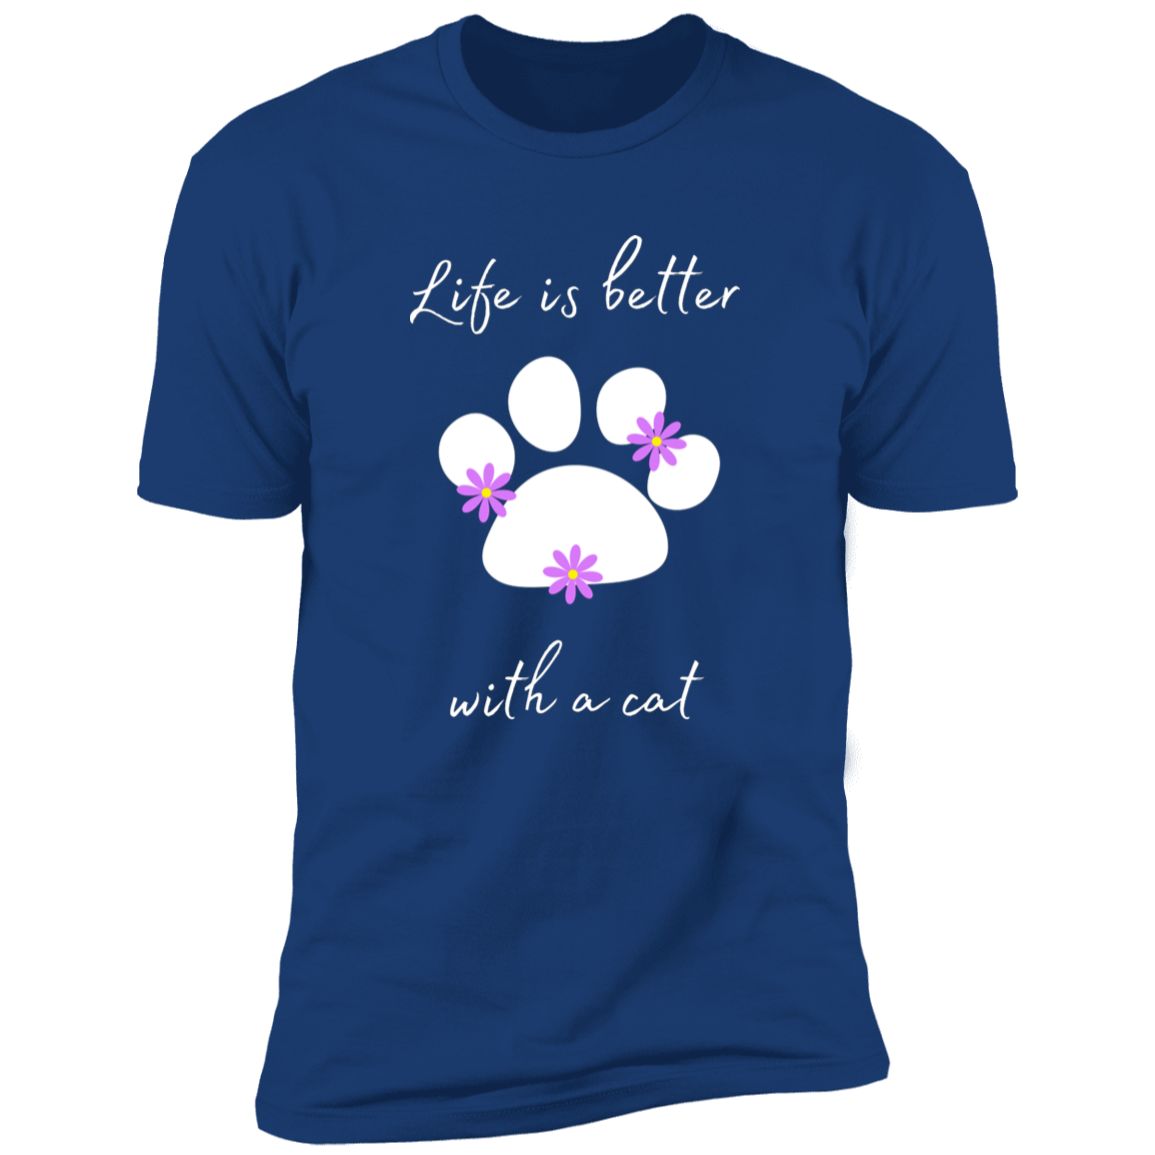 Life is Better with a Cat (Flower) cat t-shirt, cat shirt for humans, cat themed t-shirt, in royal blue